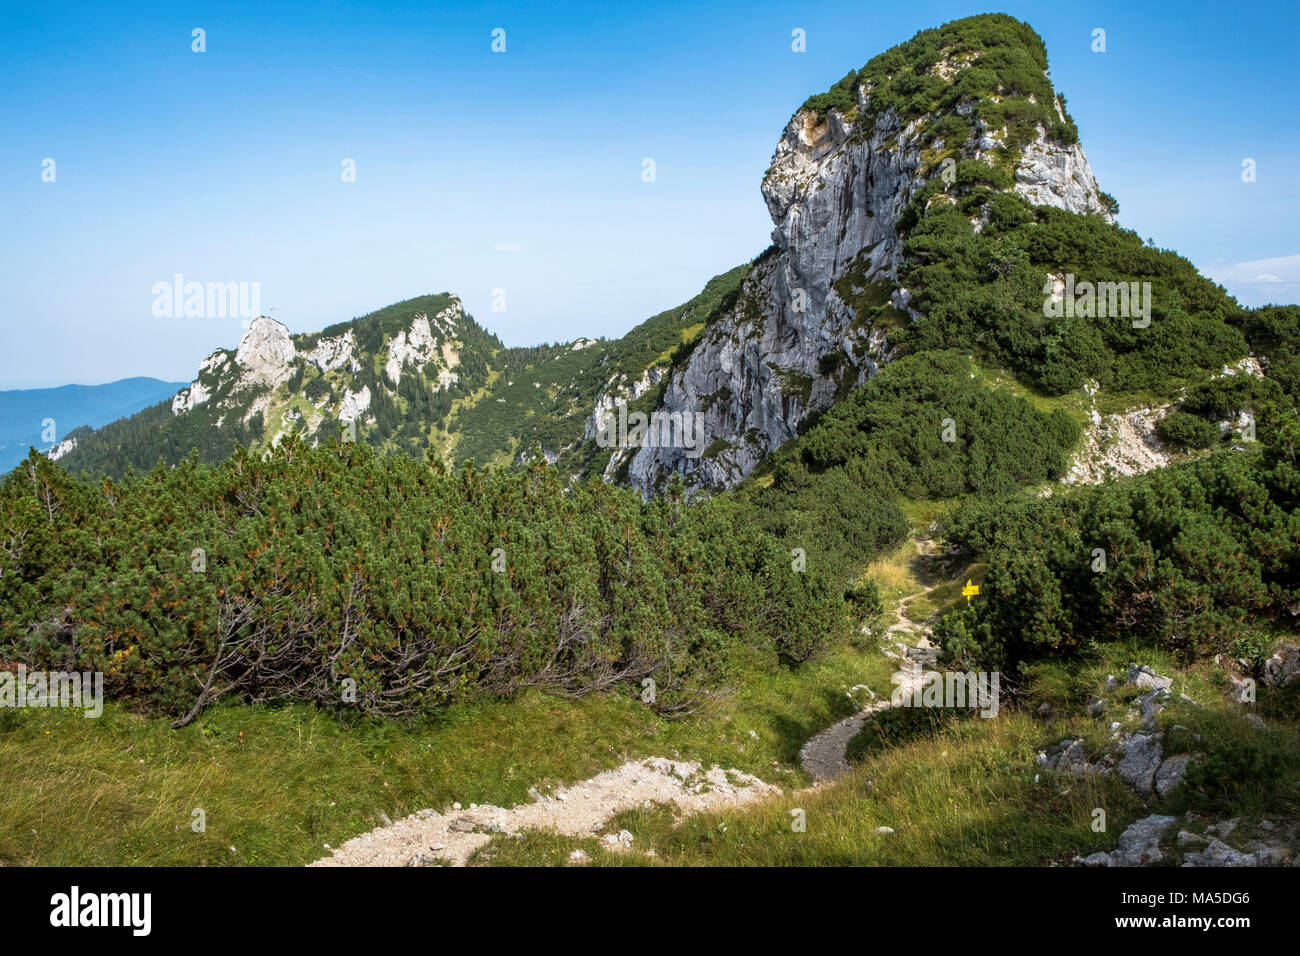 Germany, Bavaria, Bavarian foothills, Lenggries, Rocky mountain landscape at the crossing of the Benediktenwand (mountain) Stock Photo